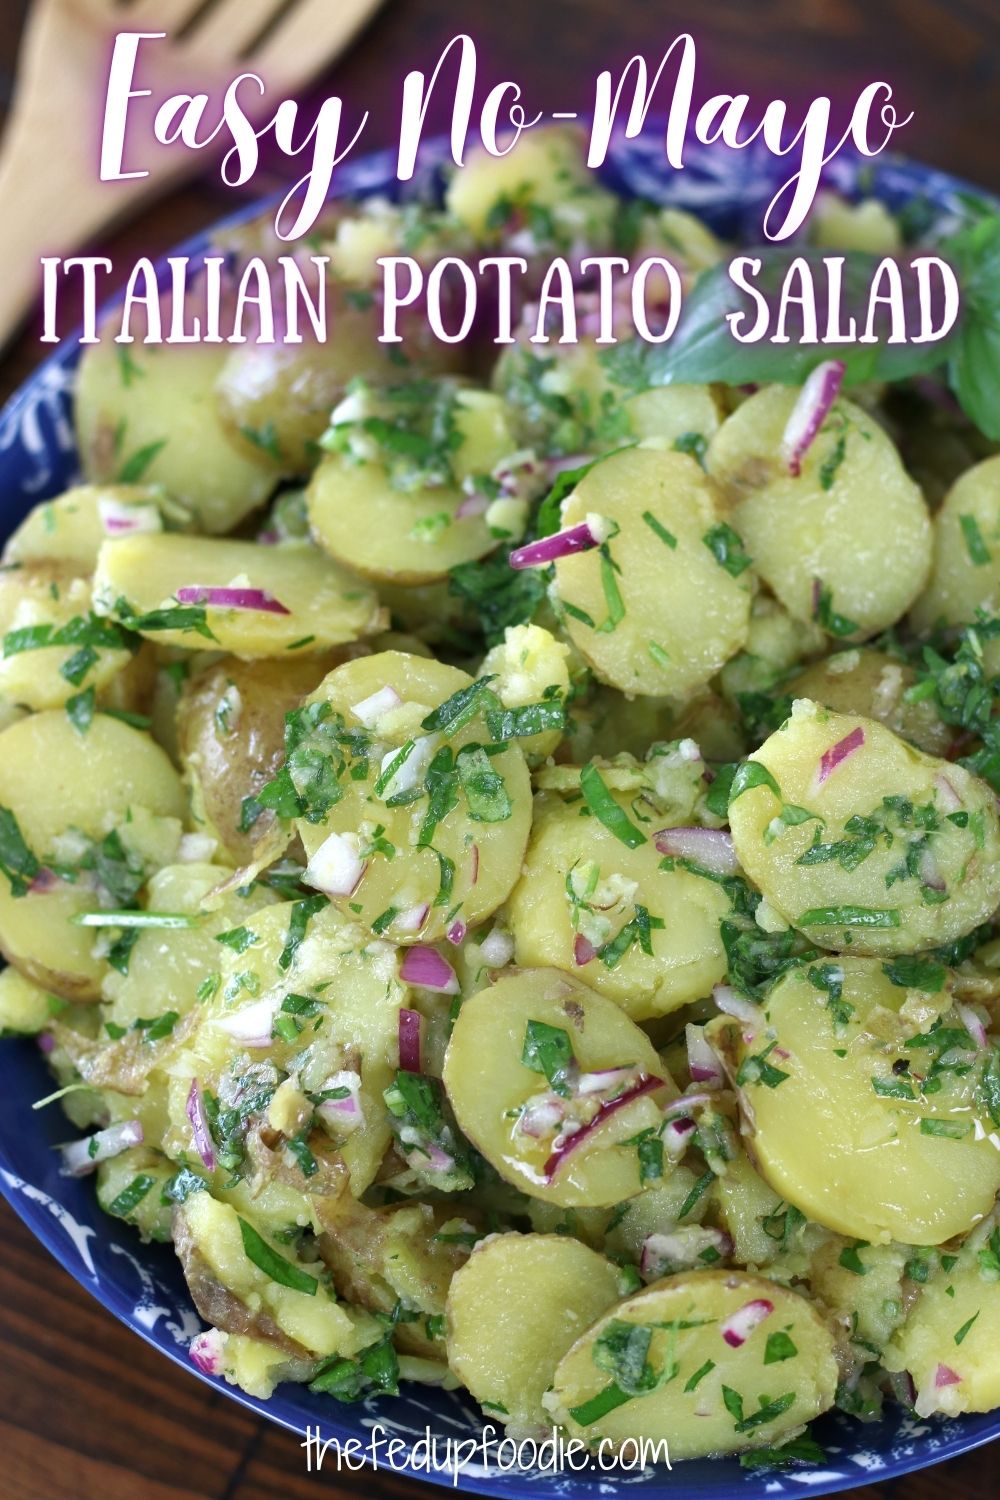 Italian Potato Salad is easy to make, healthy and full of the bright and delicious flavors of Italy. This is a perfect make-ahead side dish for picnics, BBQ's, cookouts or potlucks because it has no-mayo. Additionally, without the garnish of parmesan cheese, this is a gorgeous vegan salad that everyone will love. 
#ItalianPotatoSalad #ItalianPotatoSaladNoMayo #ColdItalianPotatoSalad #EasyItalianPotatoSalad #LemonPotatoSalad #SummerPotatoSalad #ClassicItalianPotatoSalad